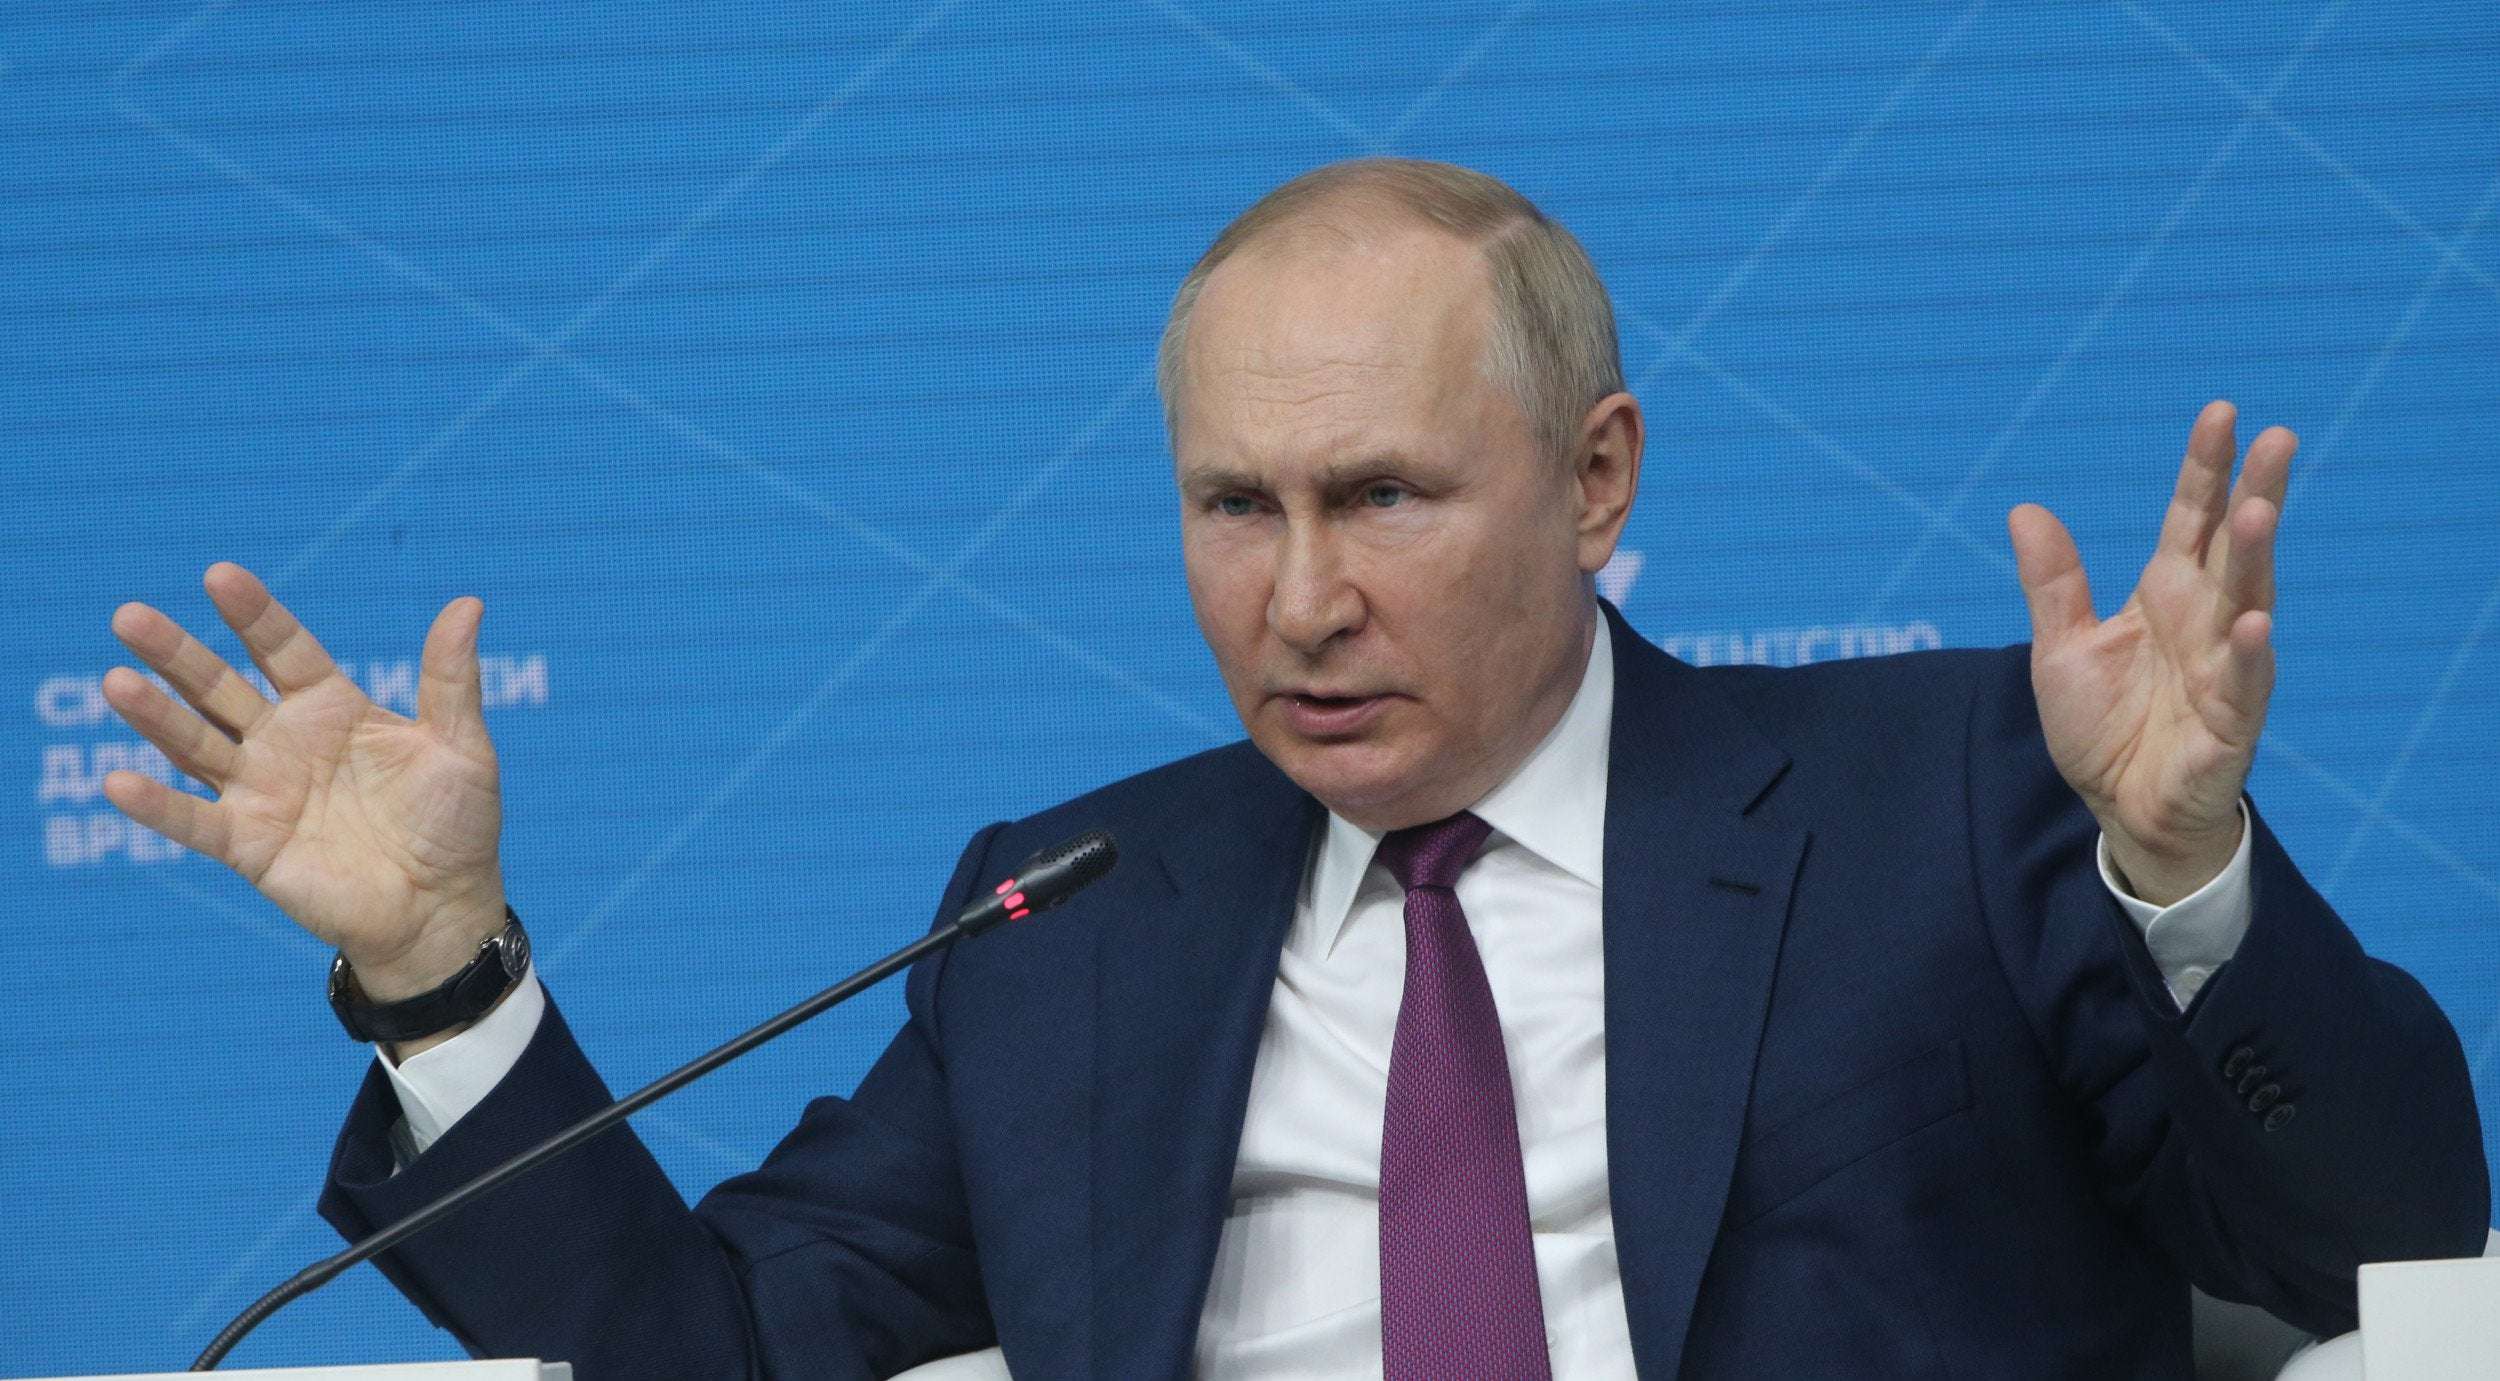 image for Putin Warns West Current World Order Is Over and New Era Is Coming